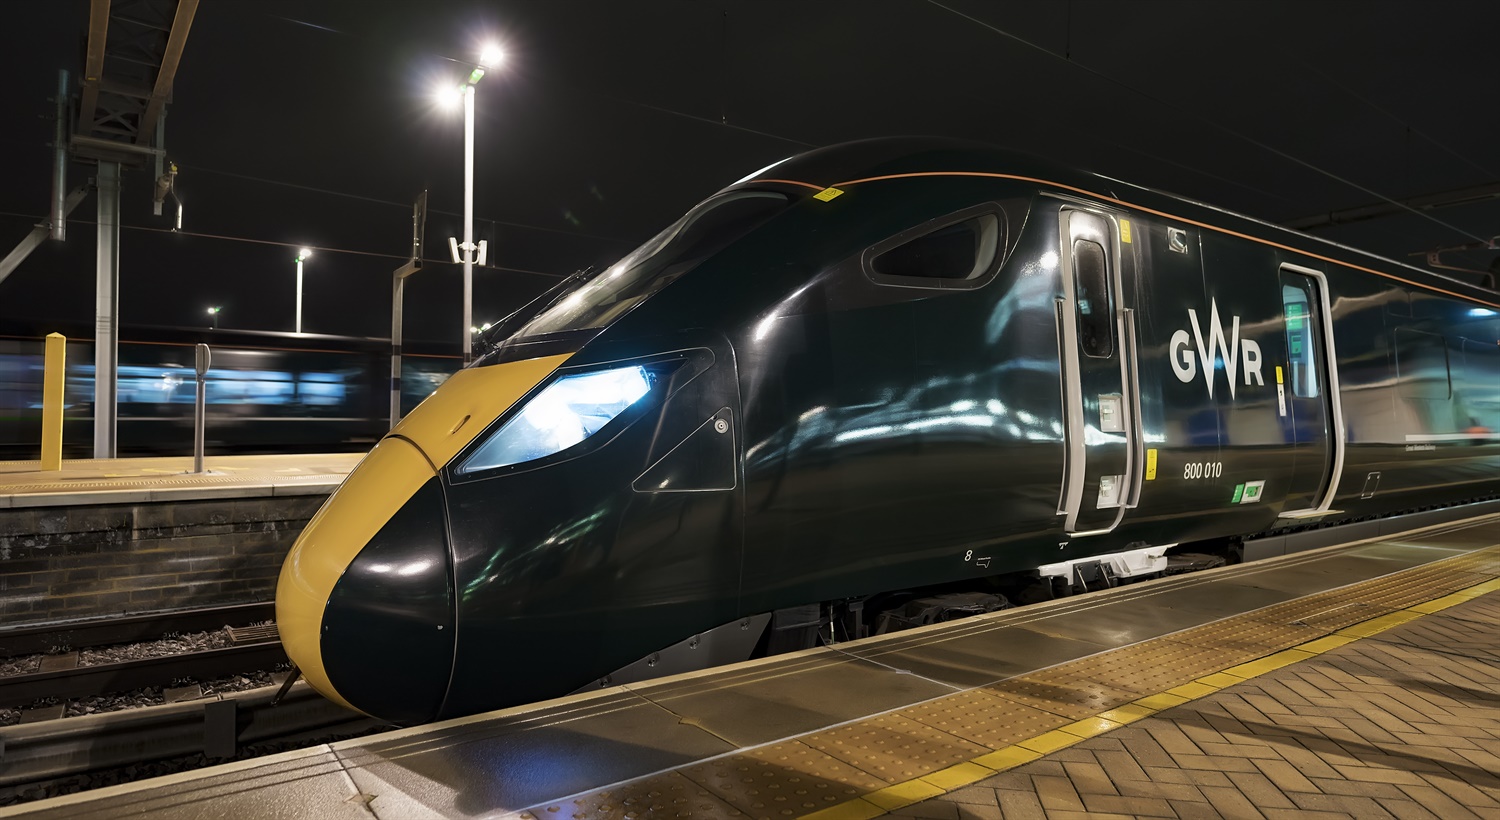 Final intercity train sees GWR deliver 10,000 more seats